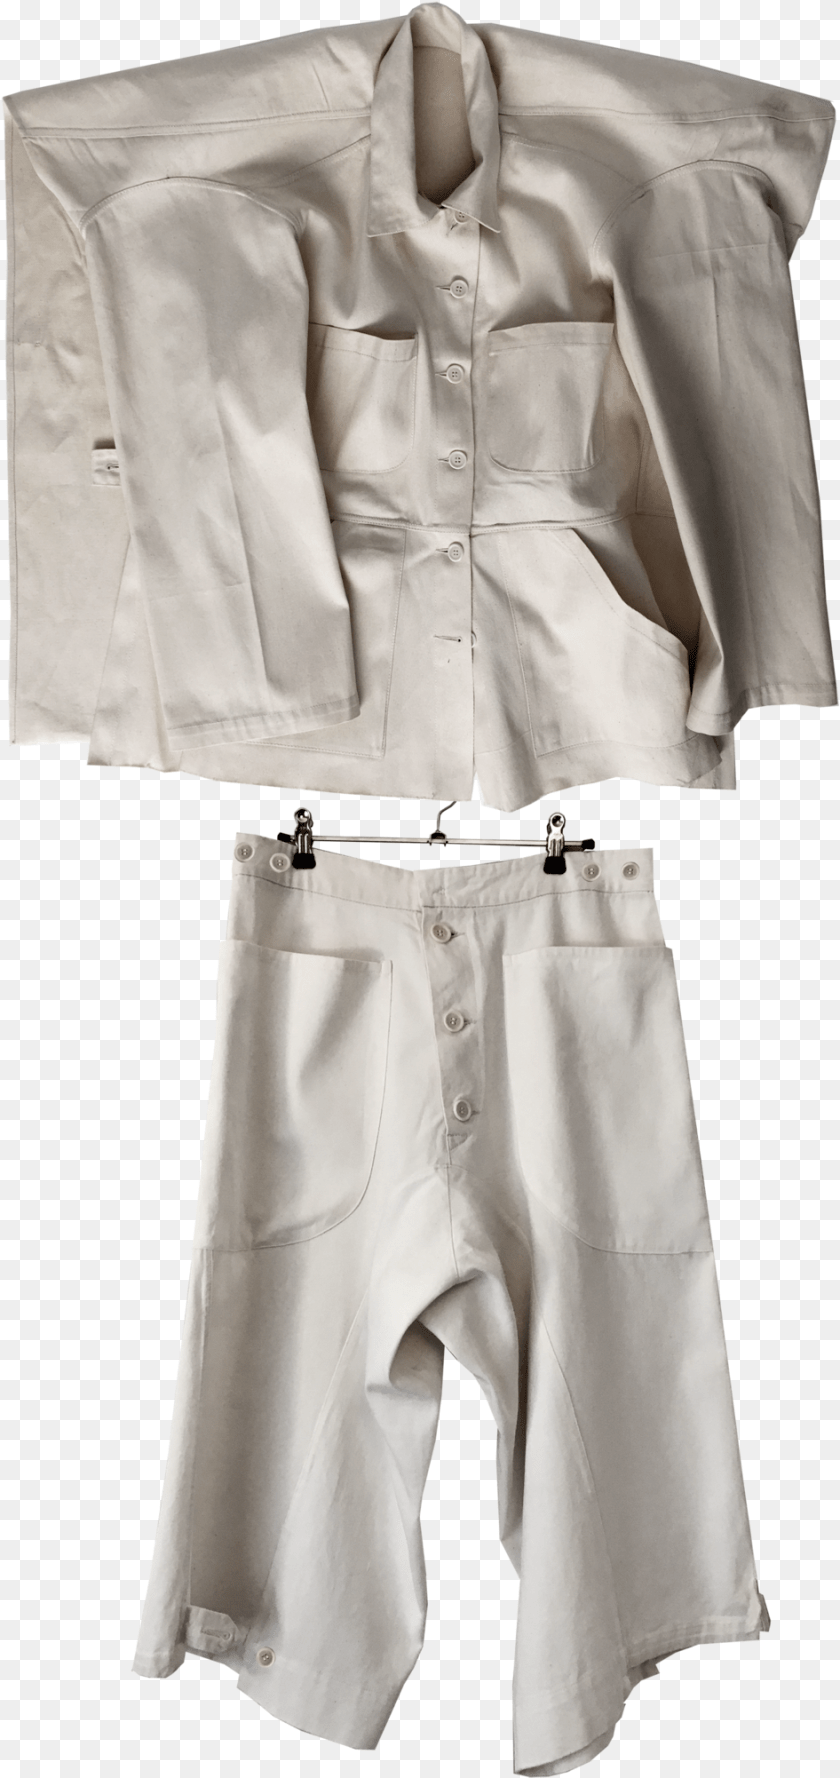 946x2002 Utility Flat Jacket Ampamp One Piece Garment, Clothing, Shorts, Skirt, Home Decor PNG